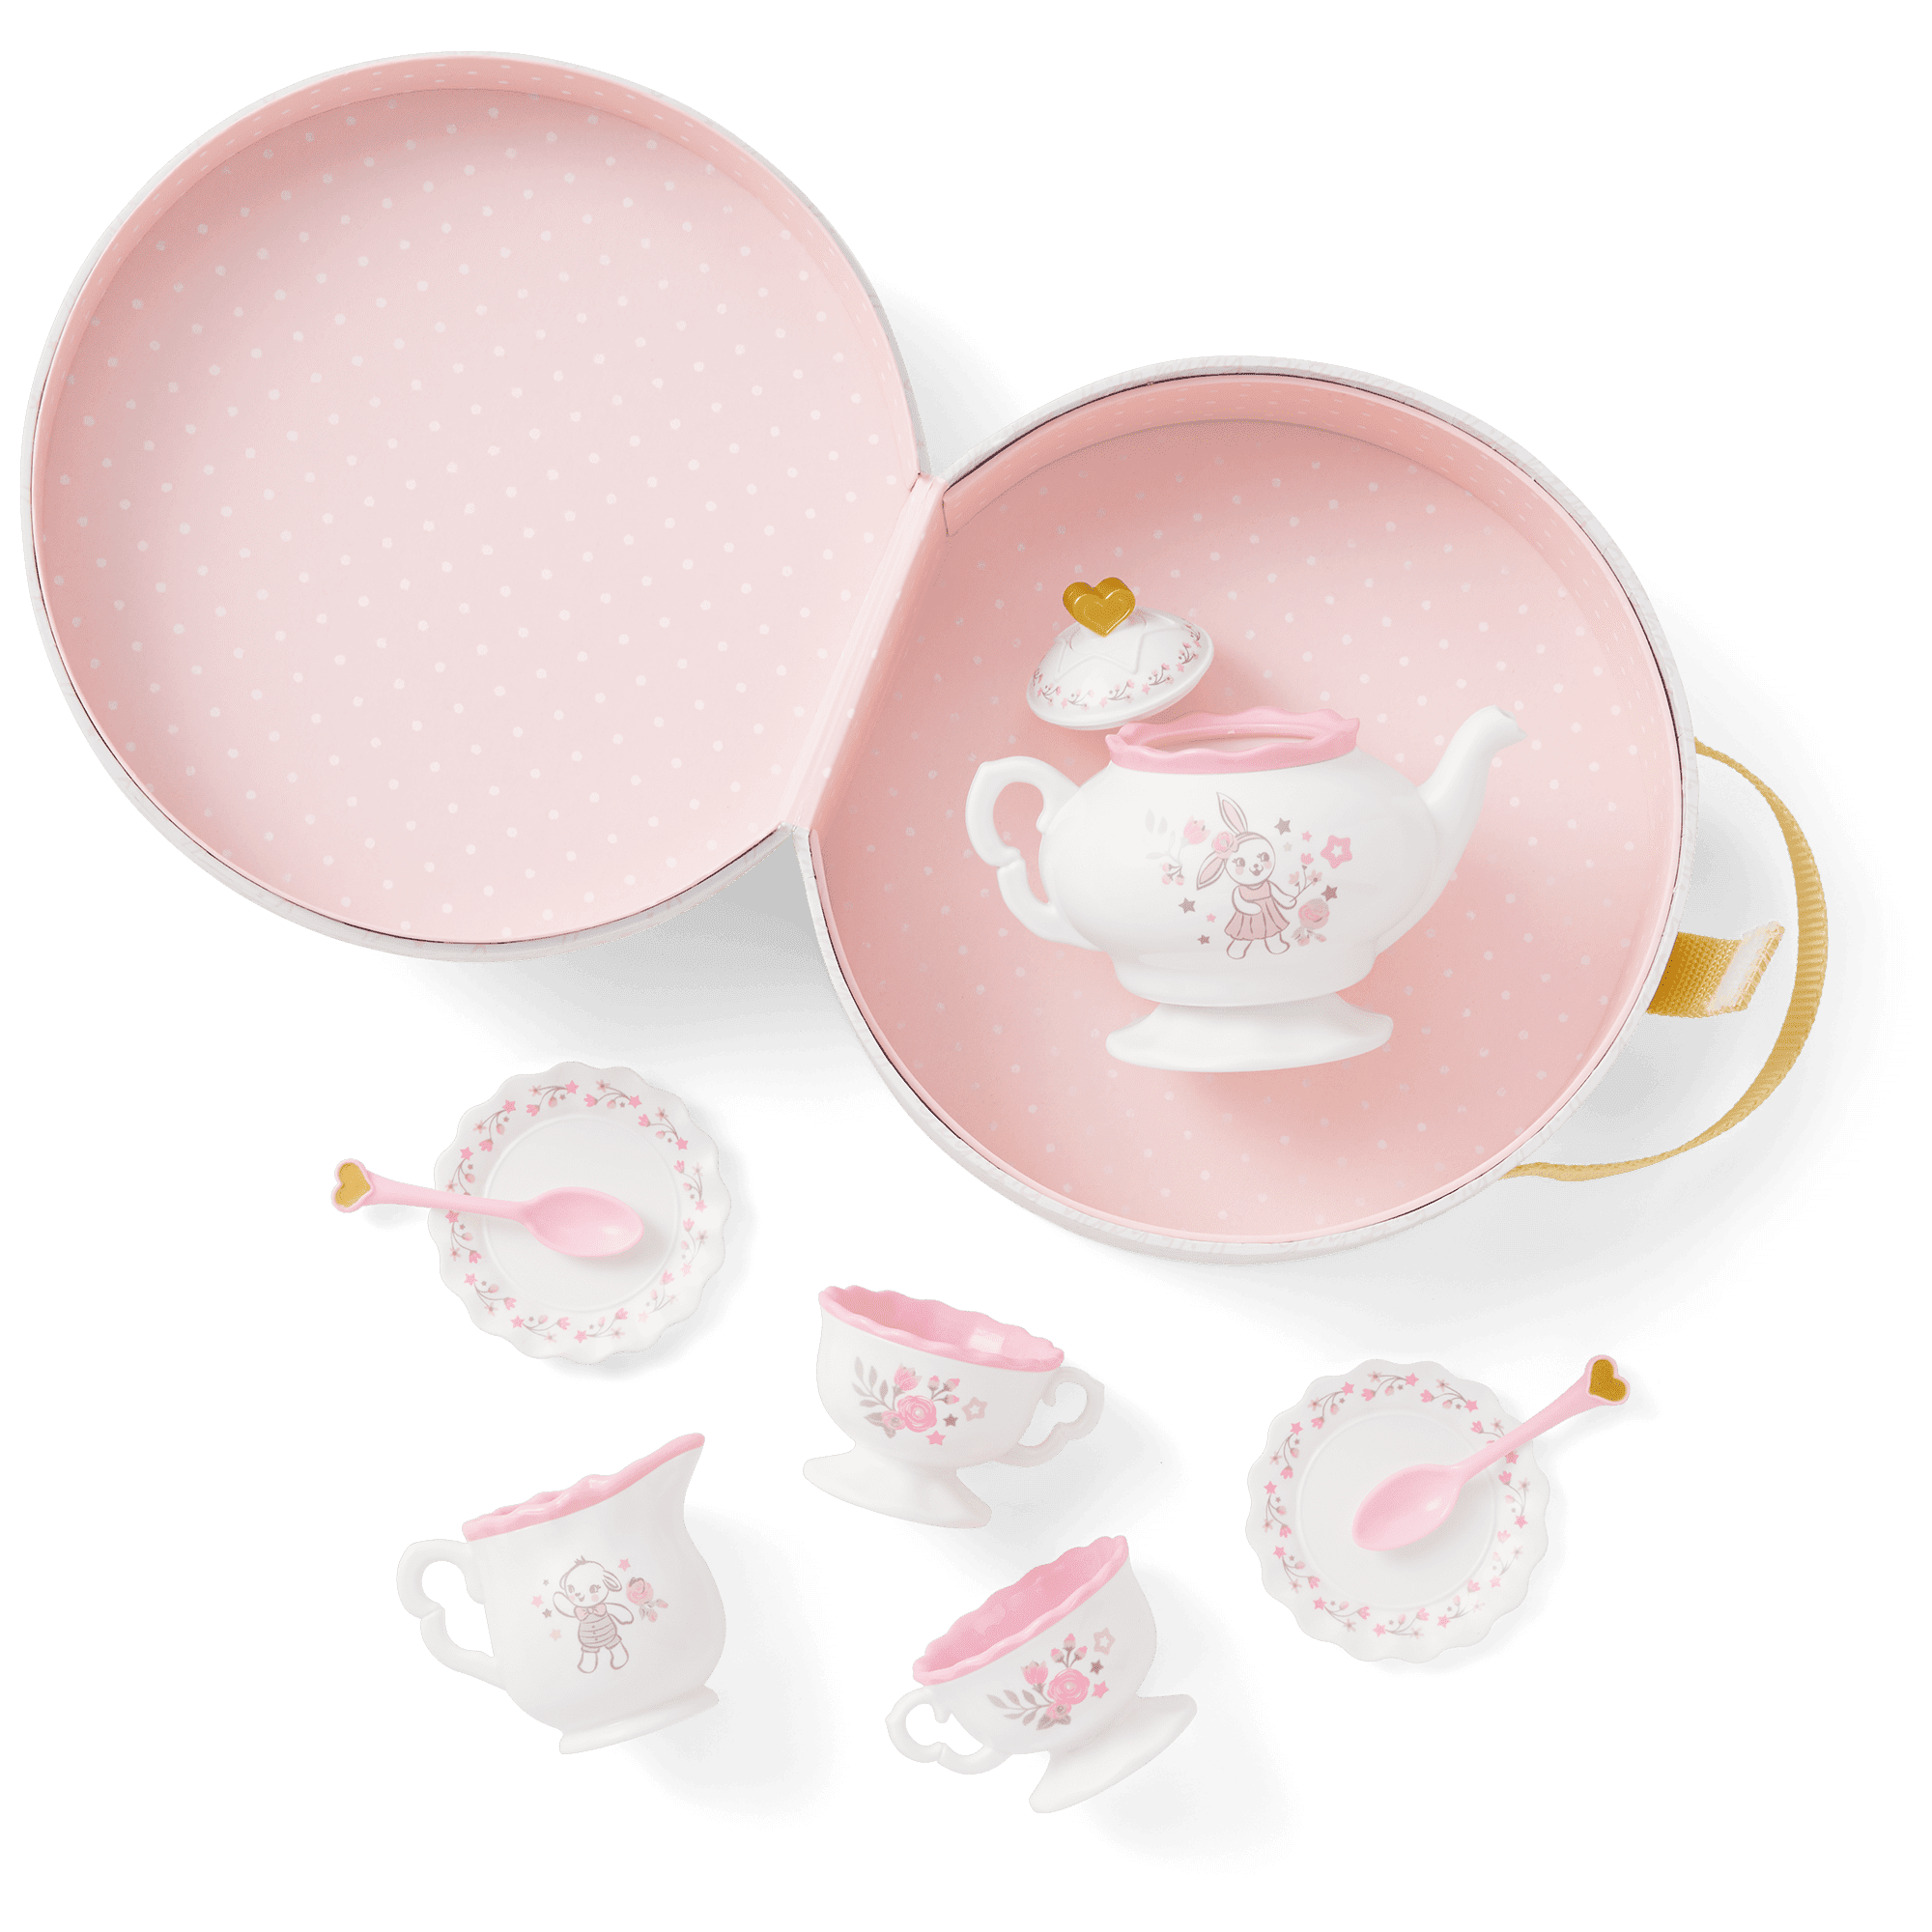 American Girl® Tea Party Set for Girls